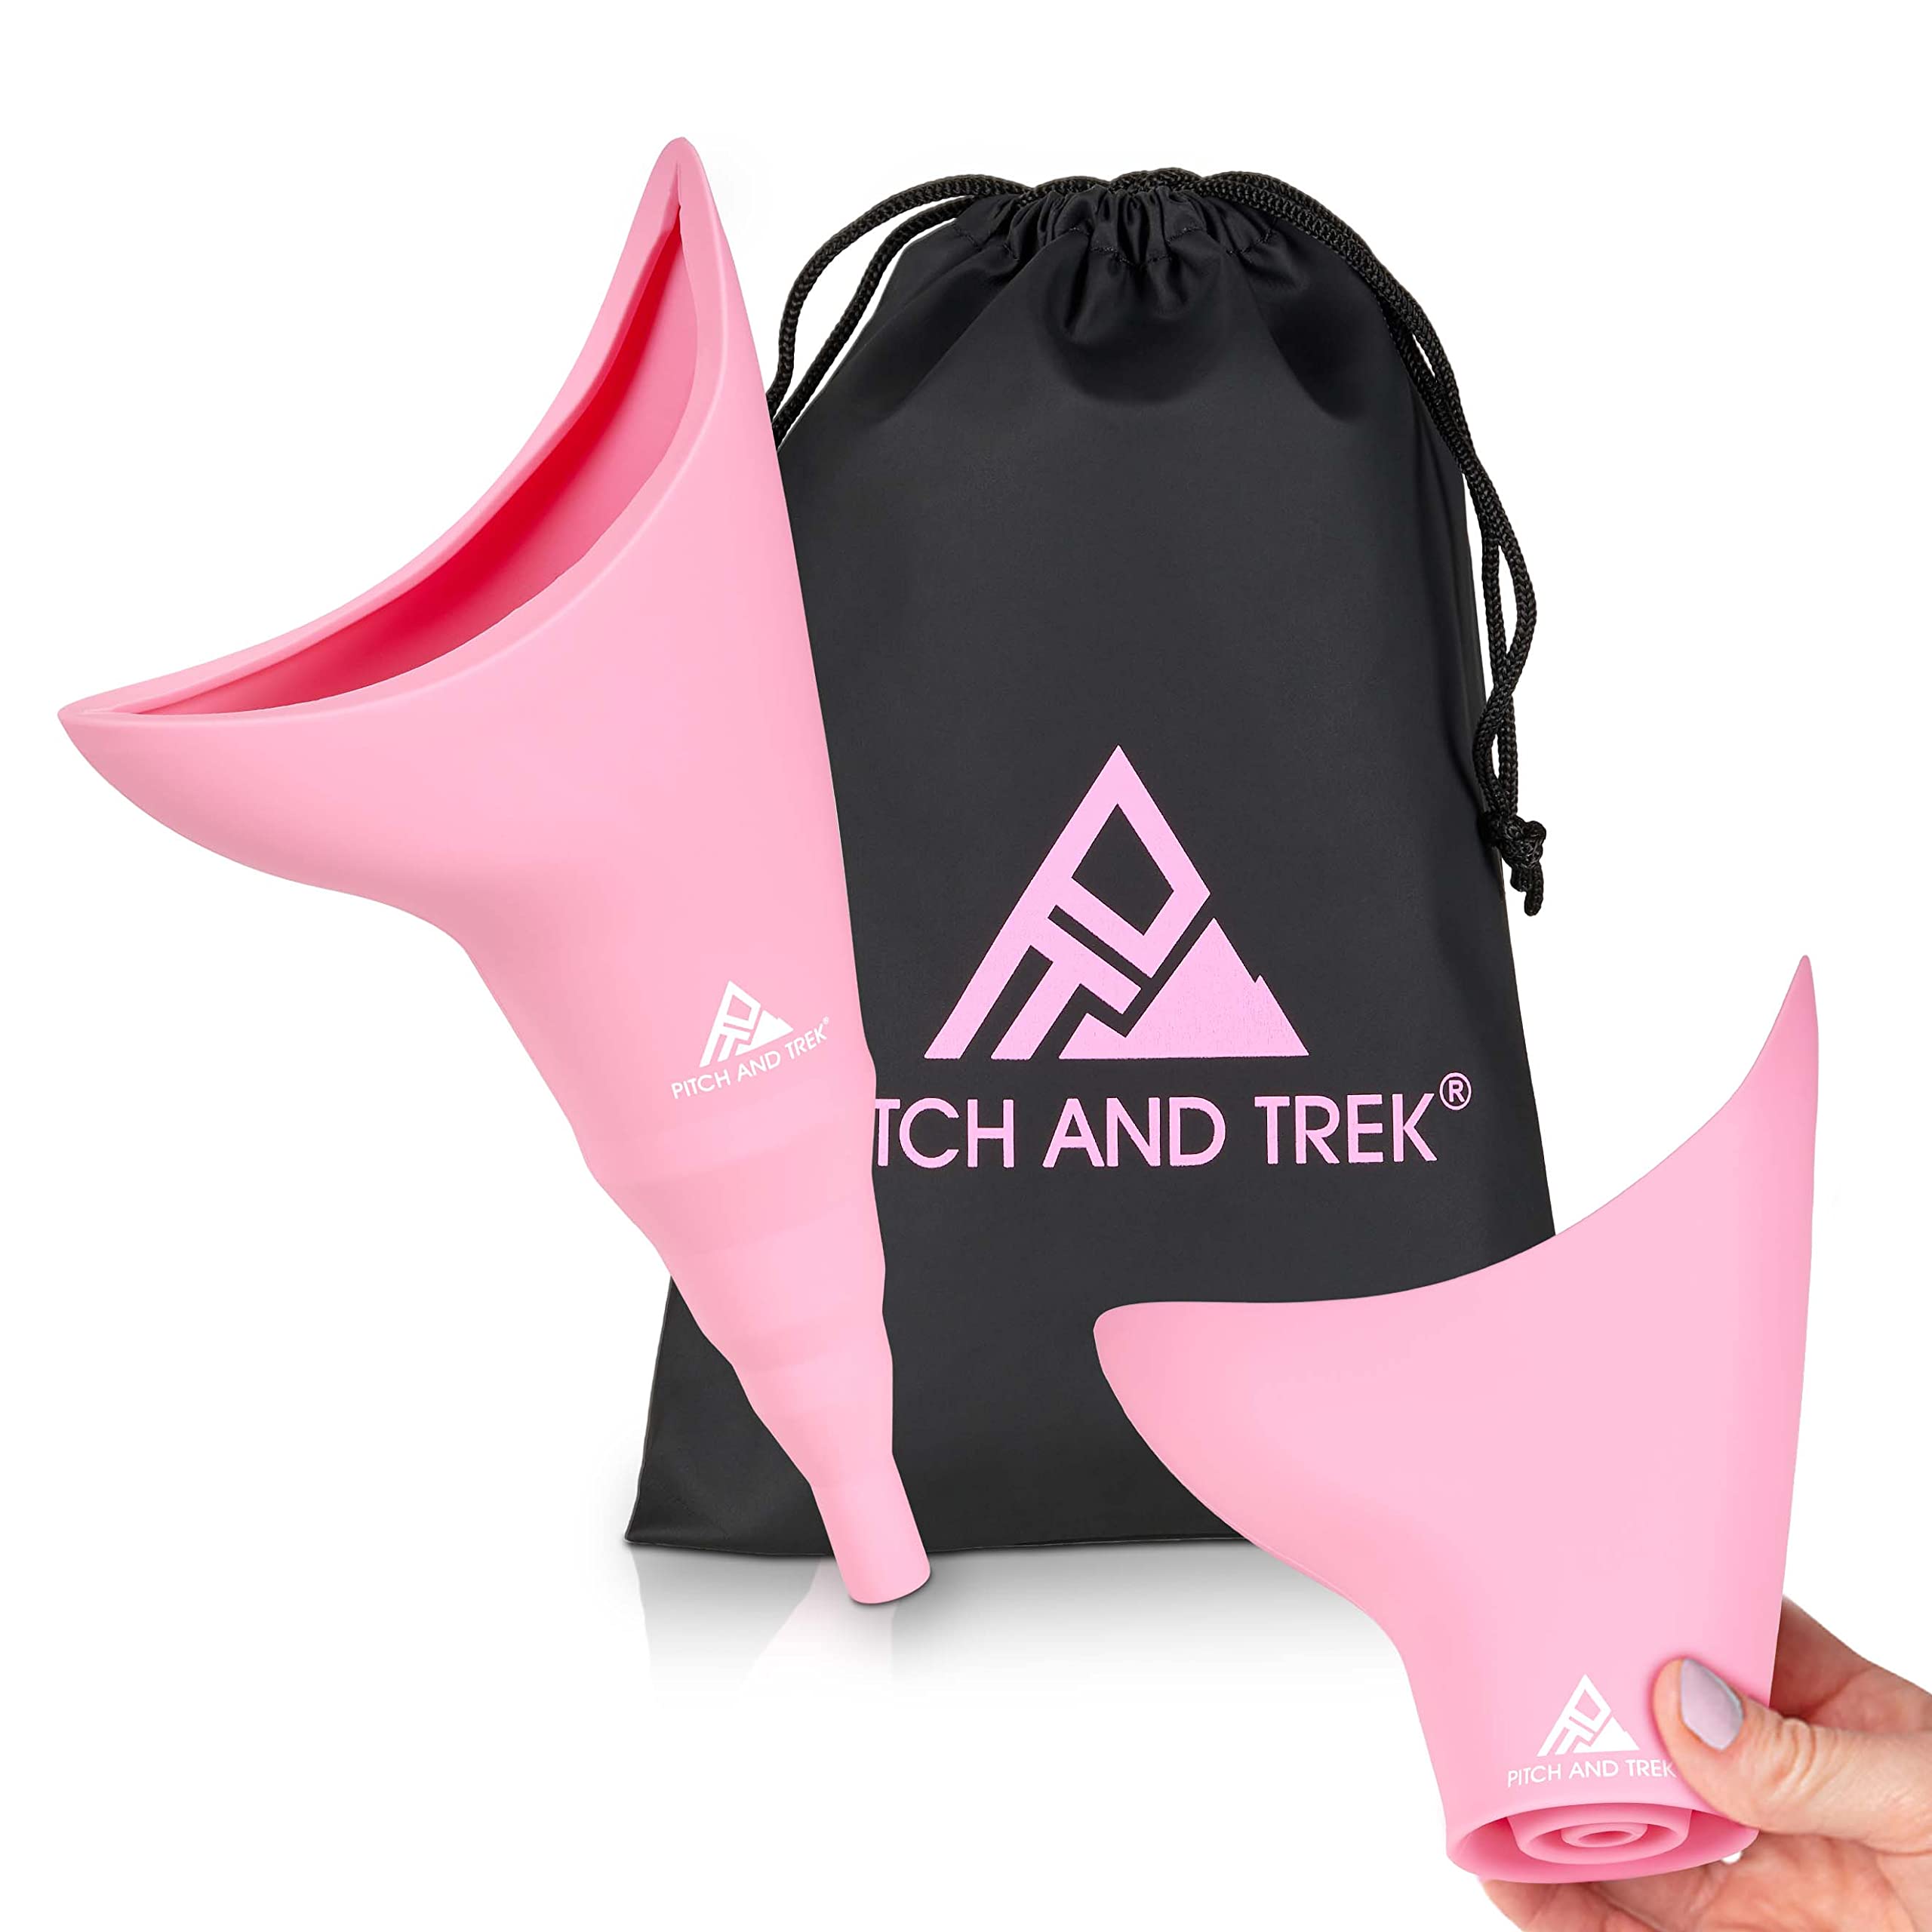 The Best Female Urination Devices for Backpacking - The Trek